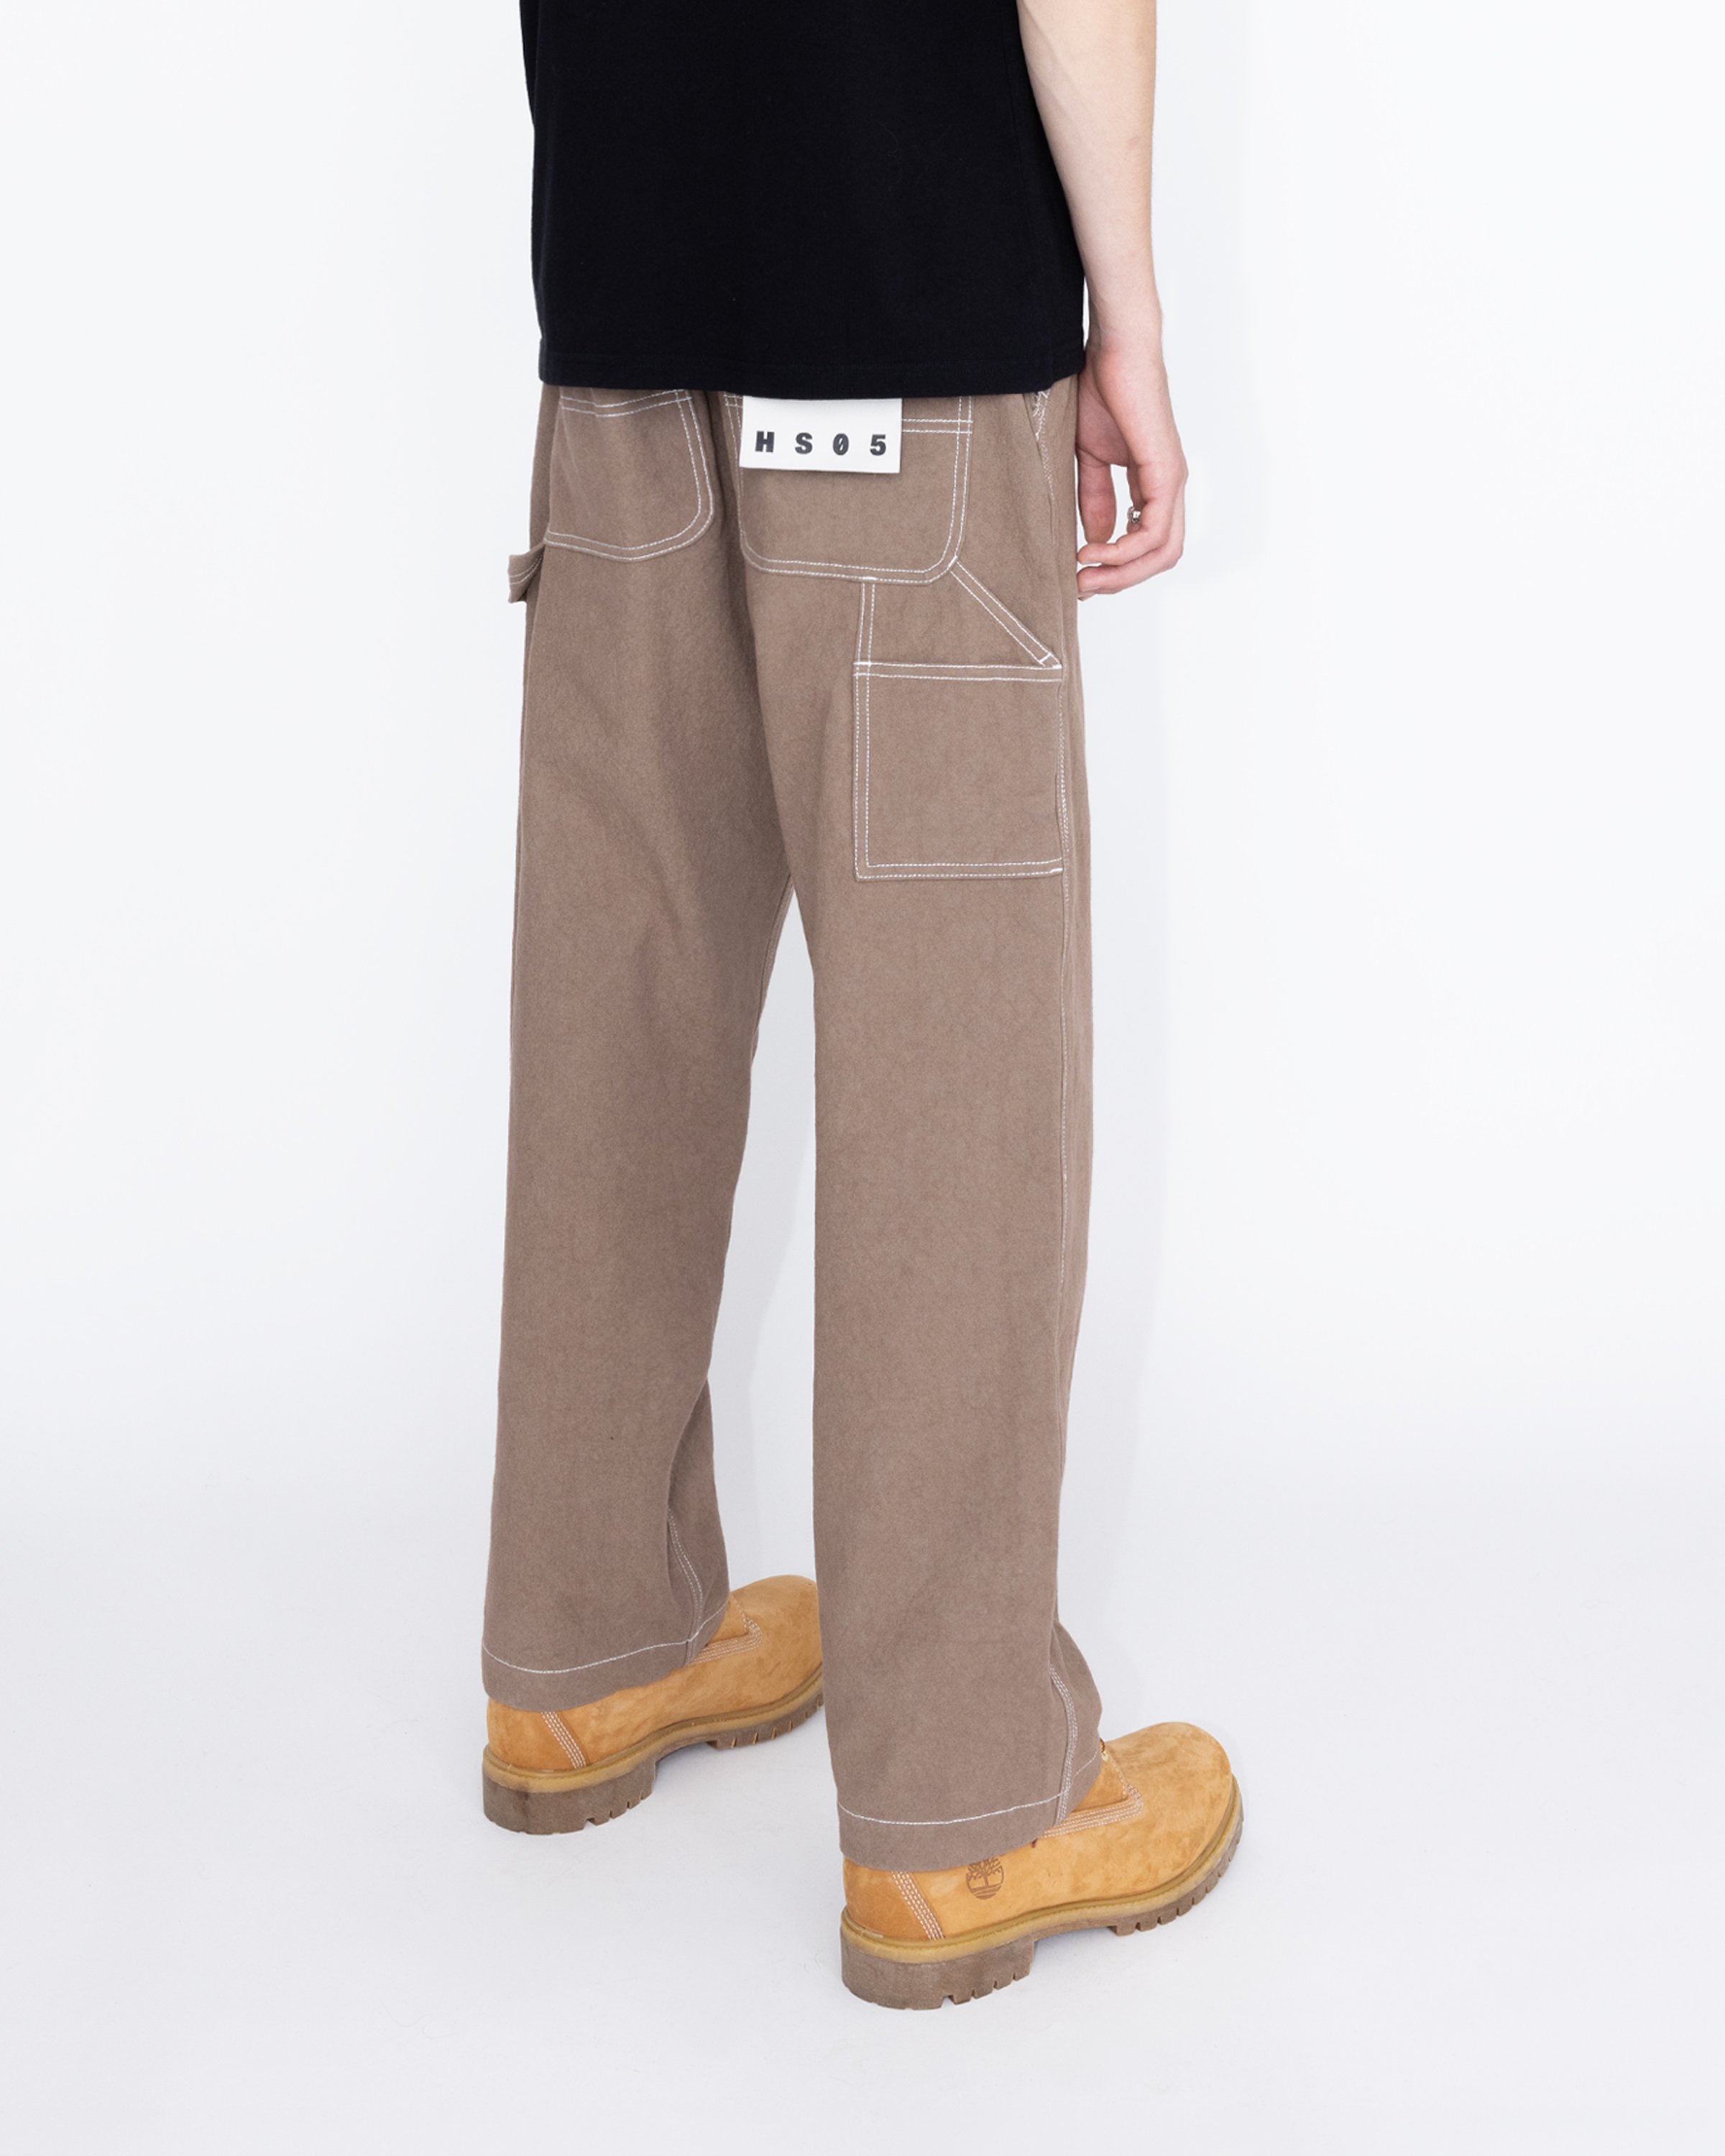 Highsnobiety HS05 - Sun Dried Canvas Carpenter Pants Brown - Clothing - Brown - Image 4